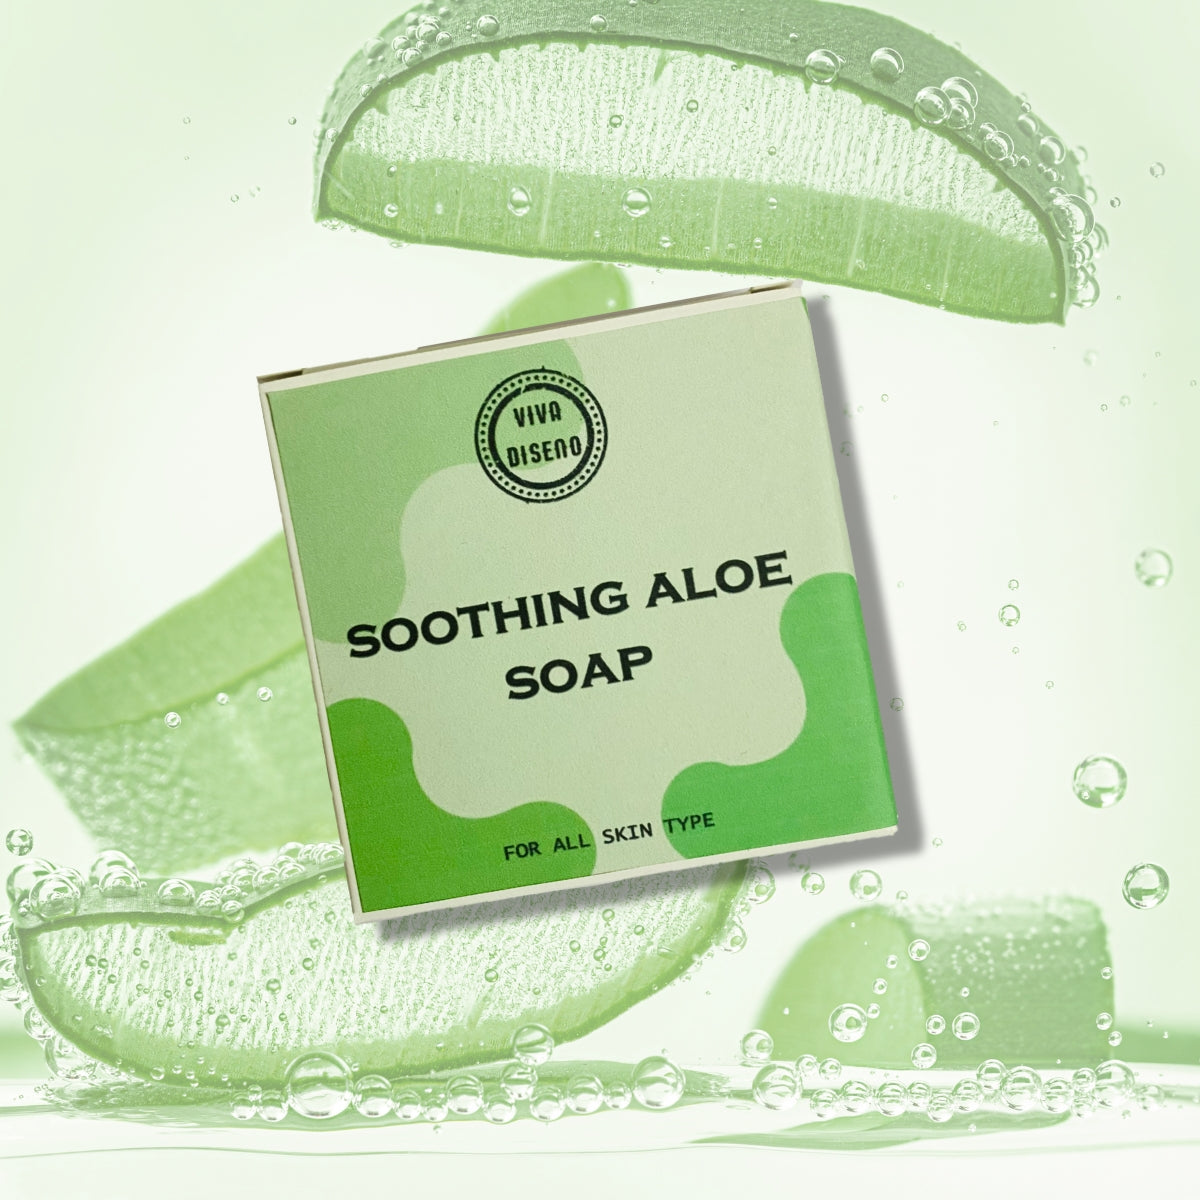 Luxury Soothing Aloe Soap by Tiarrah: Organic, Non-Toxic - The Luxury Bath and Body Care Shop